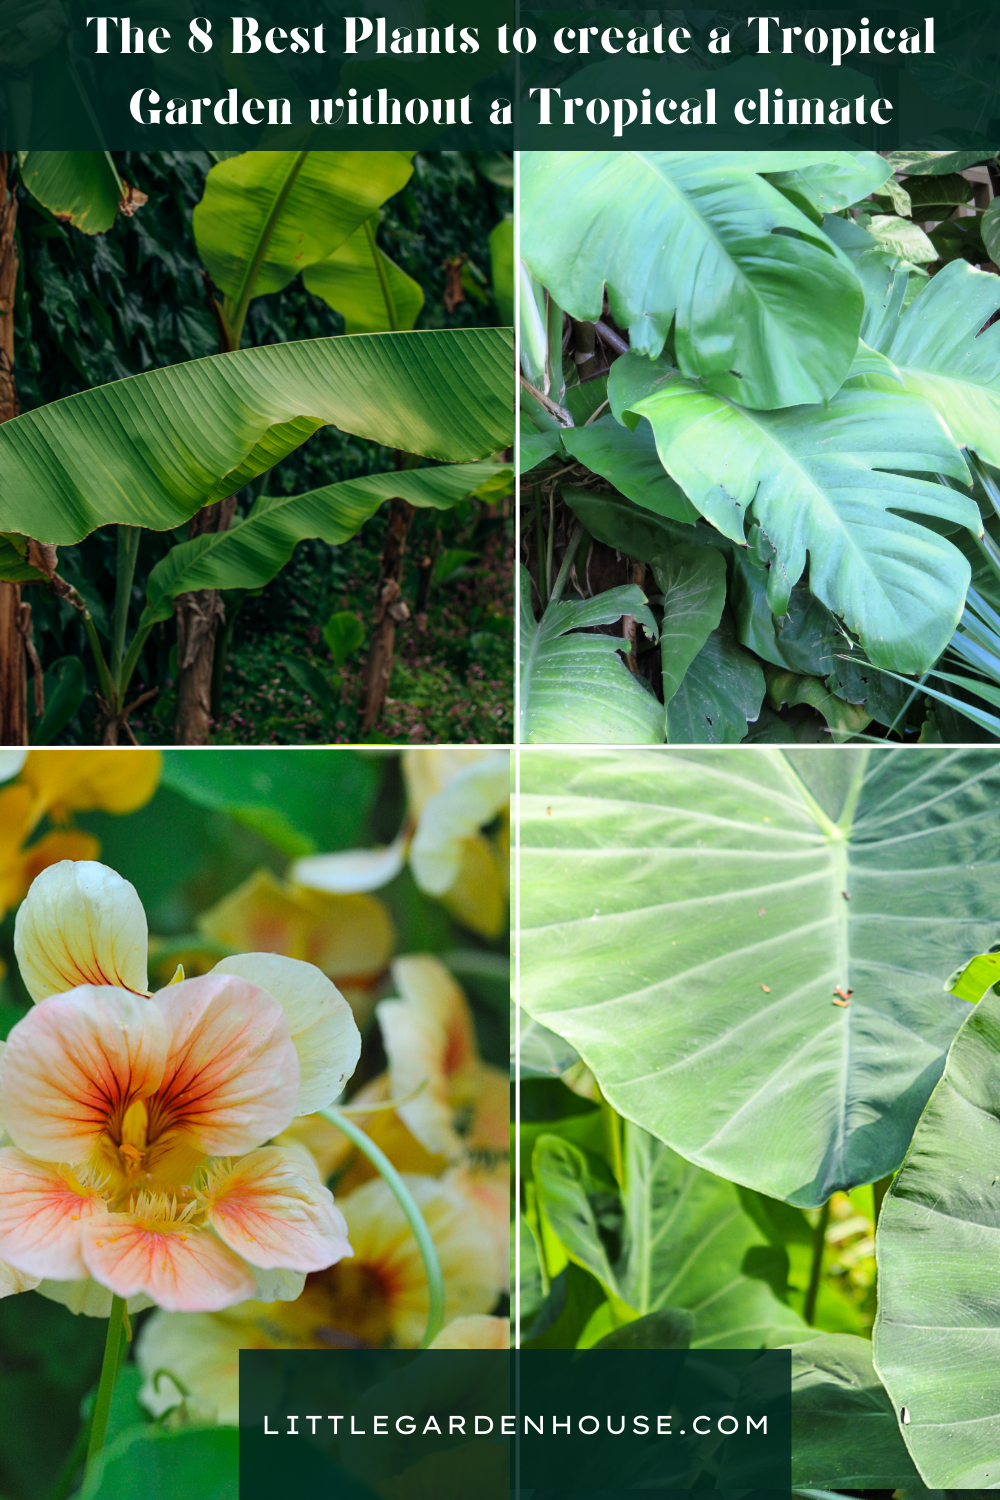 The 8 best plants to create a small Tropical Garden without a Tropical climate